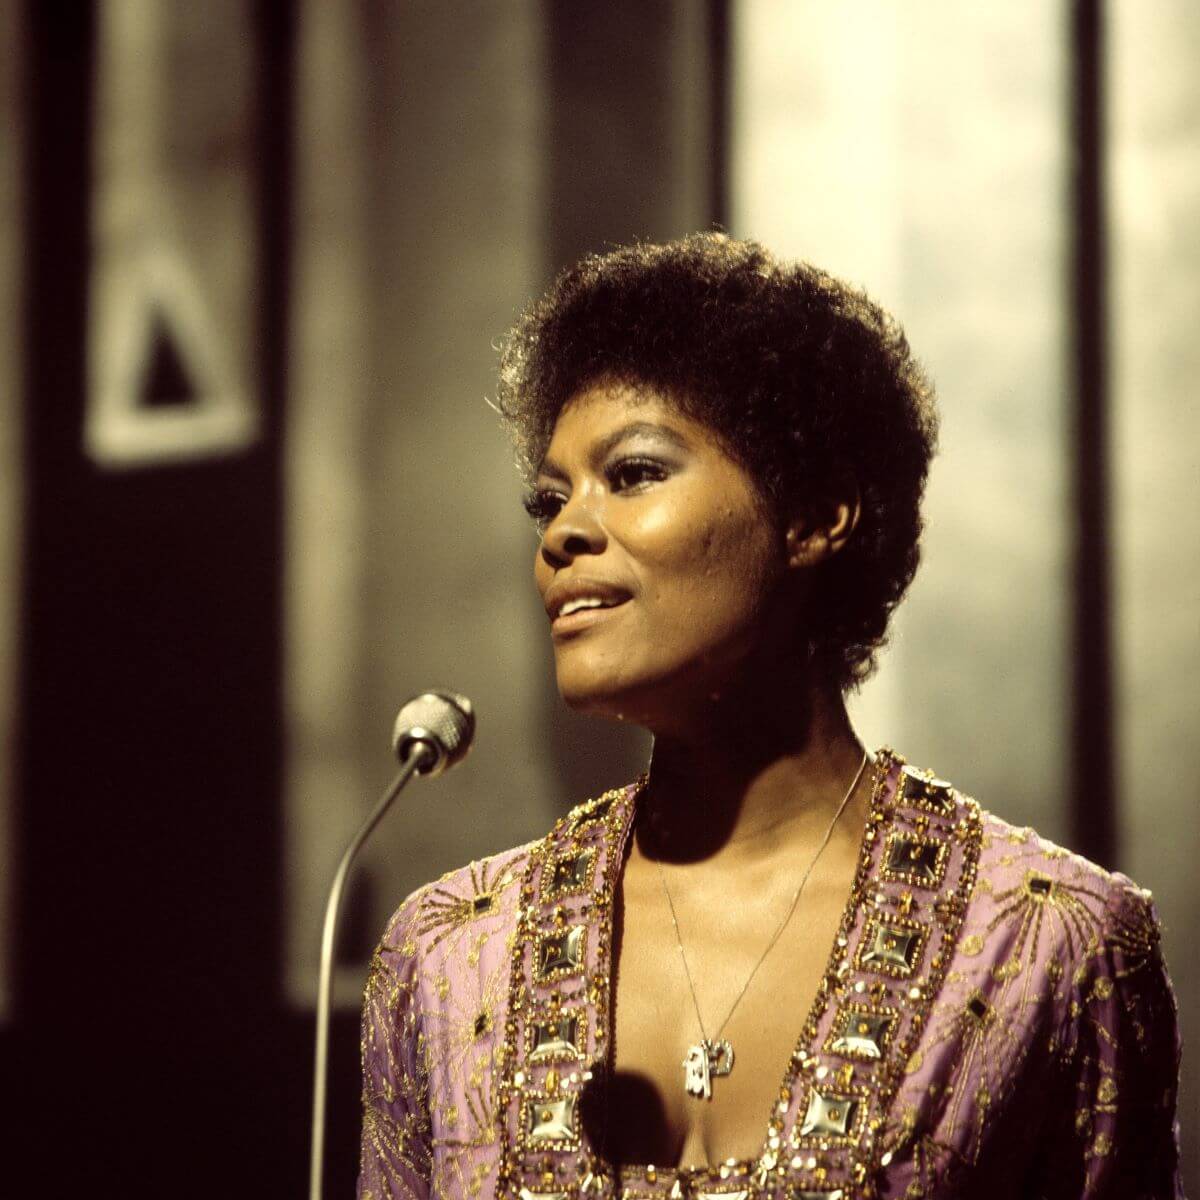 Dionne Warwick wears a purple jeweled dress and stands in front of a microphone.